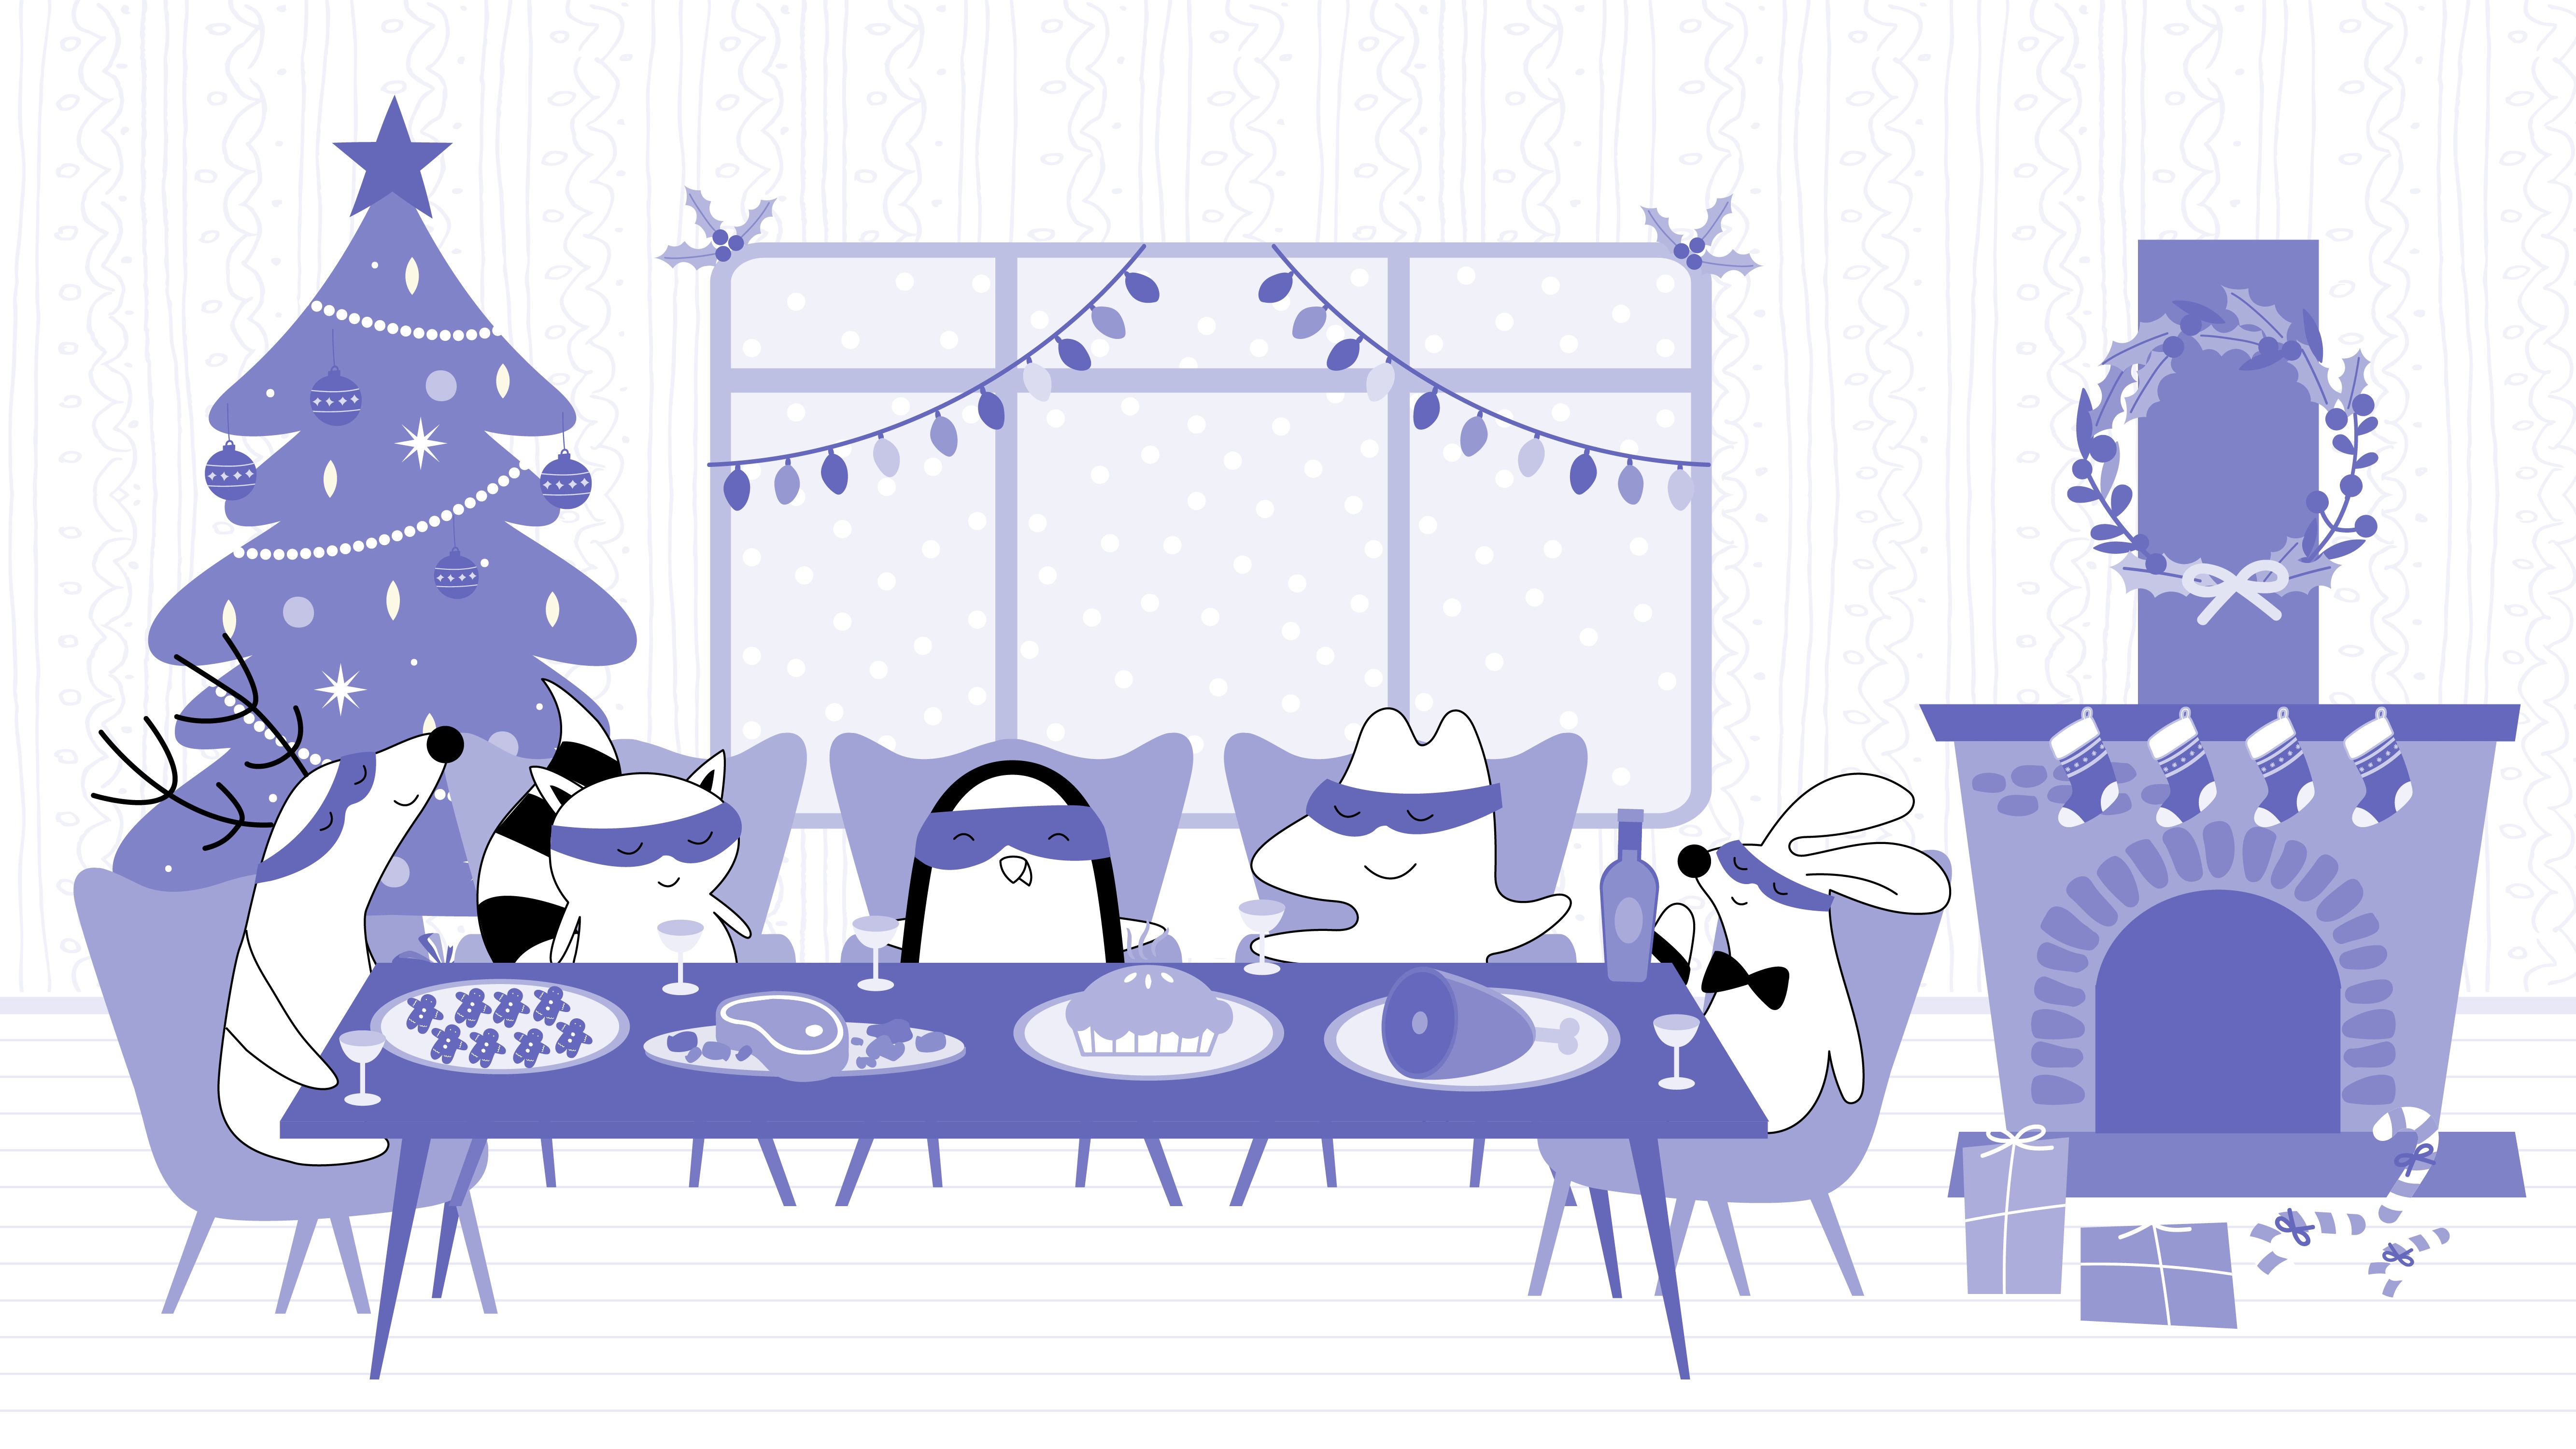 Iggy, Soren, Benji, and Pocky are sitting at the table full of traditional Spanish Christmas treats and cava wine.